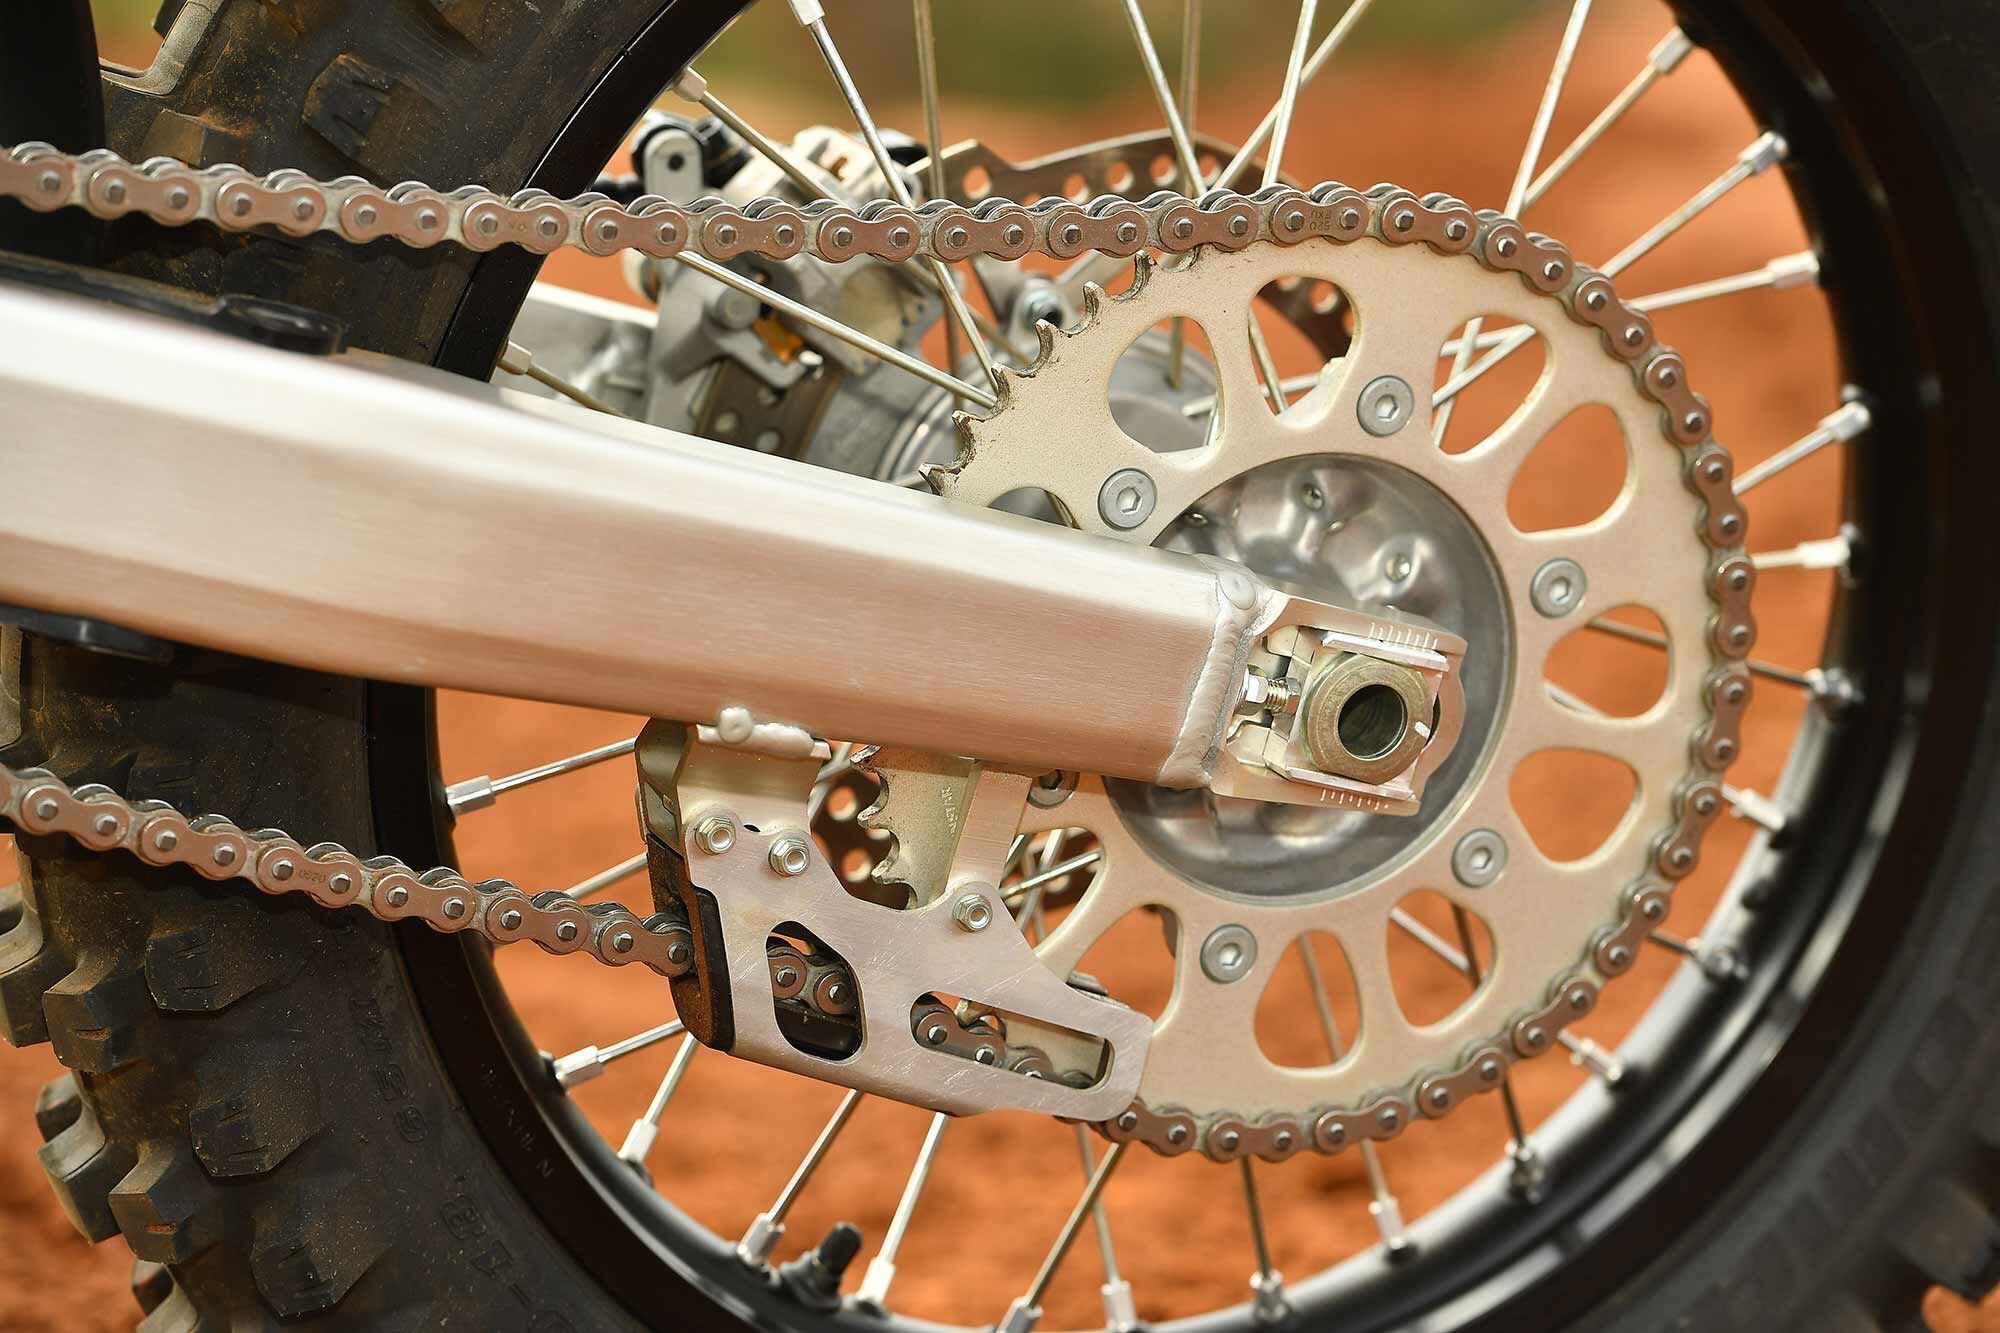 A 50-tooth rear sprocket comes standard on the CRF450RX, whereas the CRF450R gets spec’d with a 49-tooth. A common modification is to run longer chain/taller gearing combos for more length and chassis stability. The standard axle position is quite forward, especially compared to that of the CRF450X.